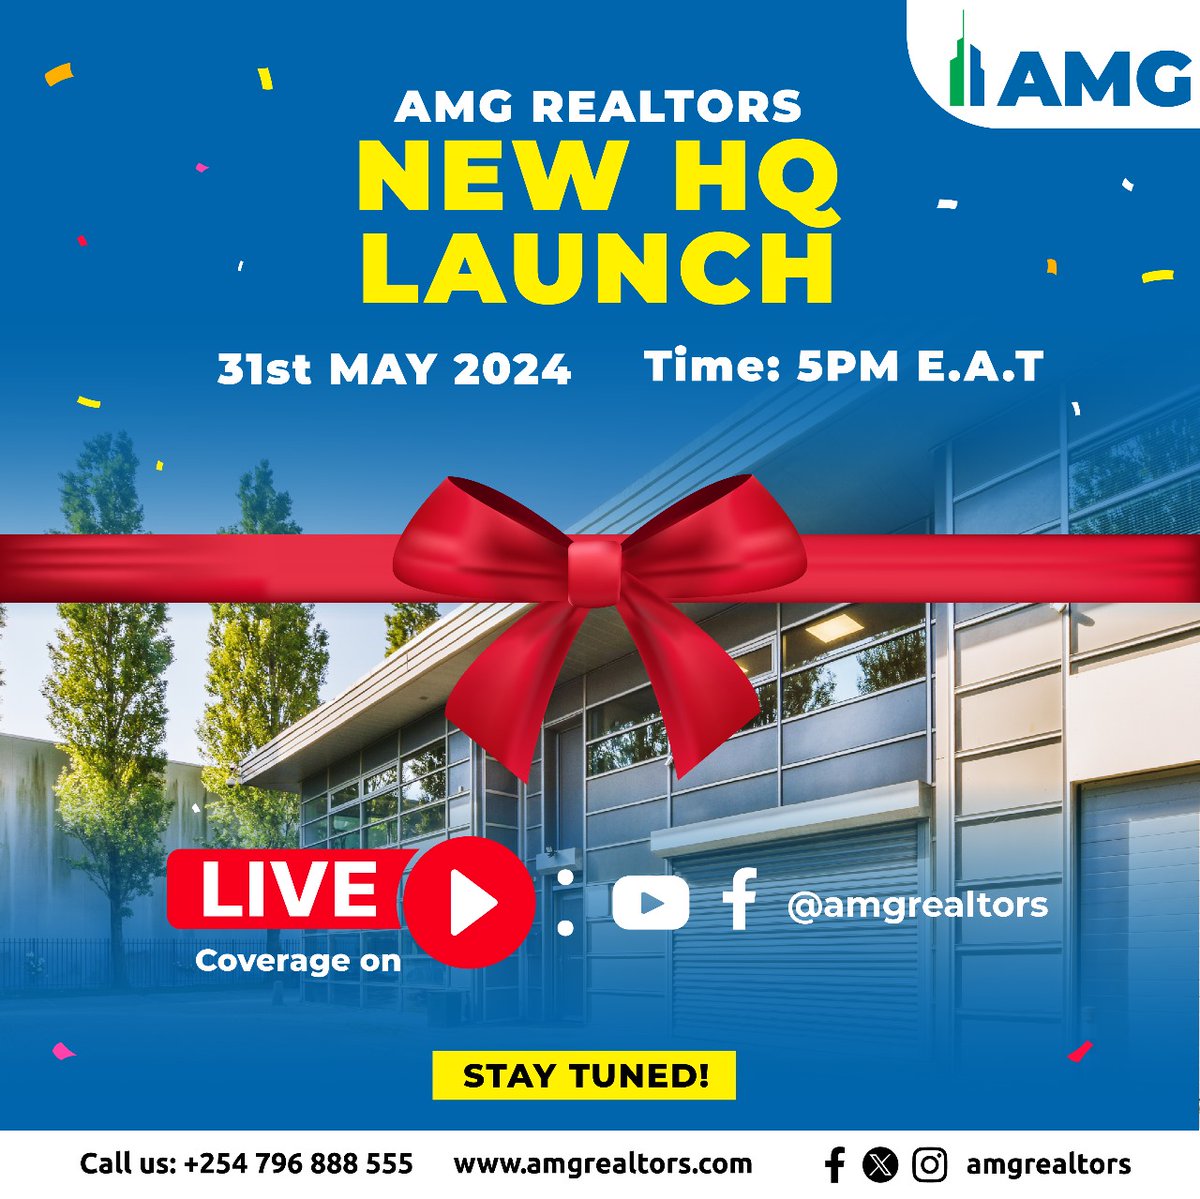 Big day for AMG Realtors! Their state-of-the-art international headquarters is set to launch, marking a new chapter in client accessibility and support.
#AccessGuaranteed